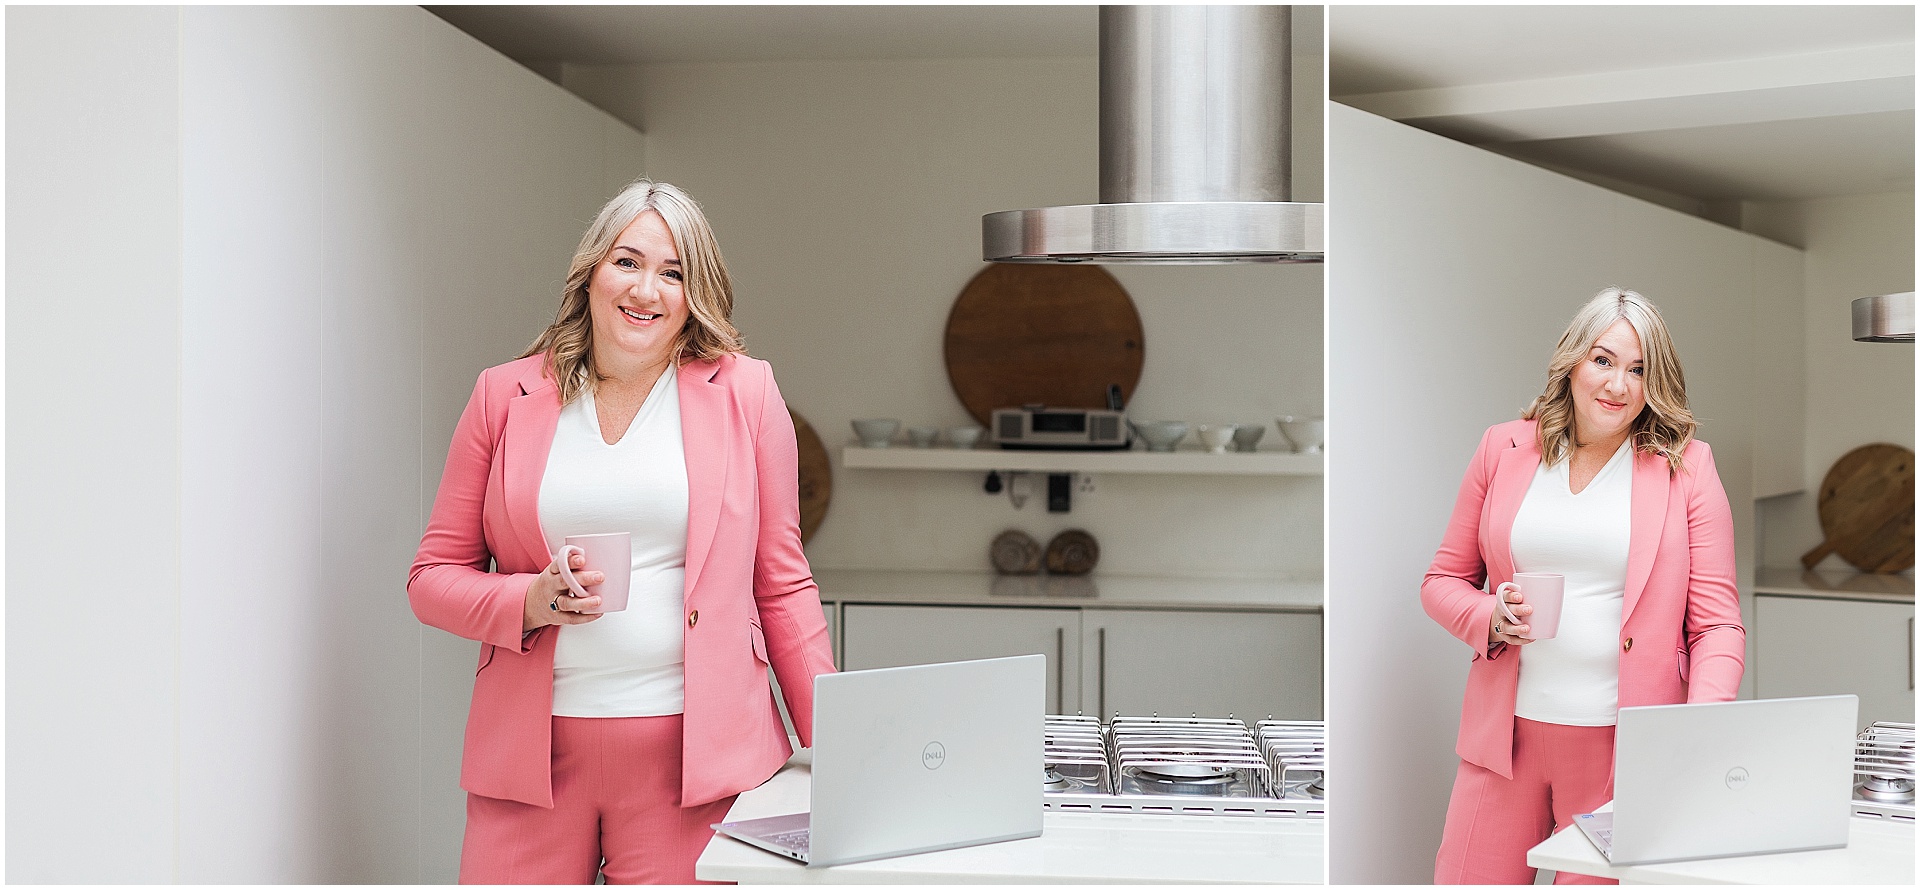 London brand shoot with corporate strategist Carol Deveney. She is wearing a pink trouser suit and a white blouse, working at a laptop in a kitchen. Images by London brand photographer AKP Branding Stories